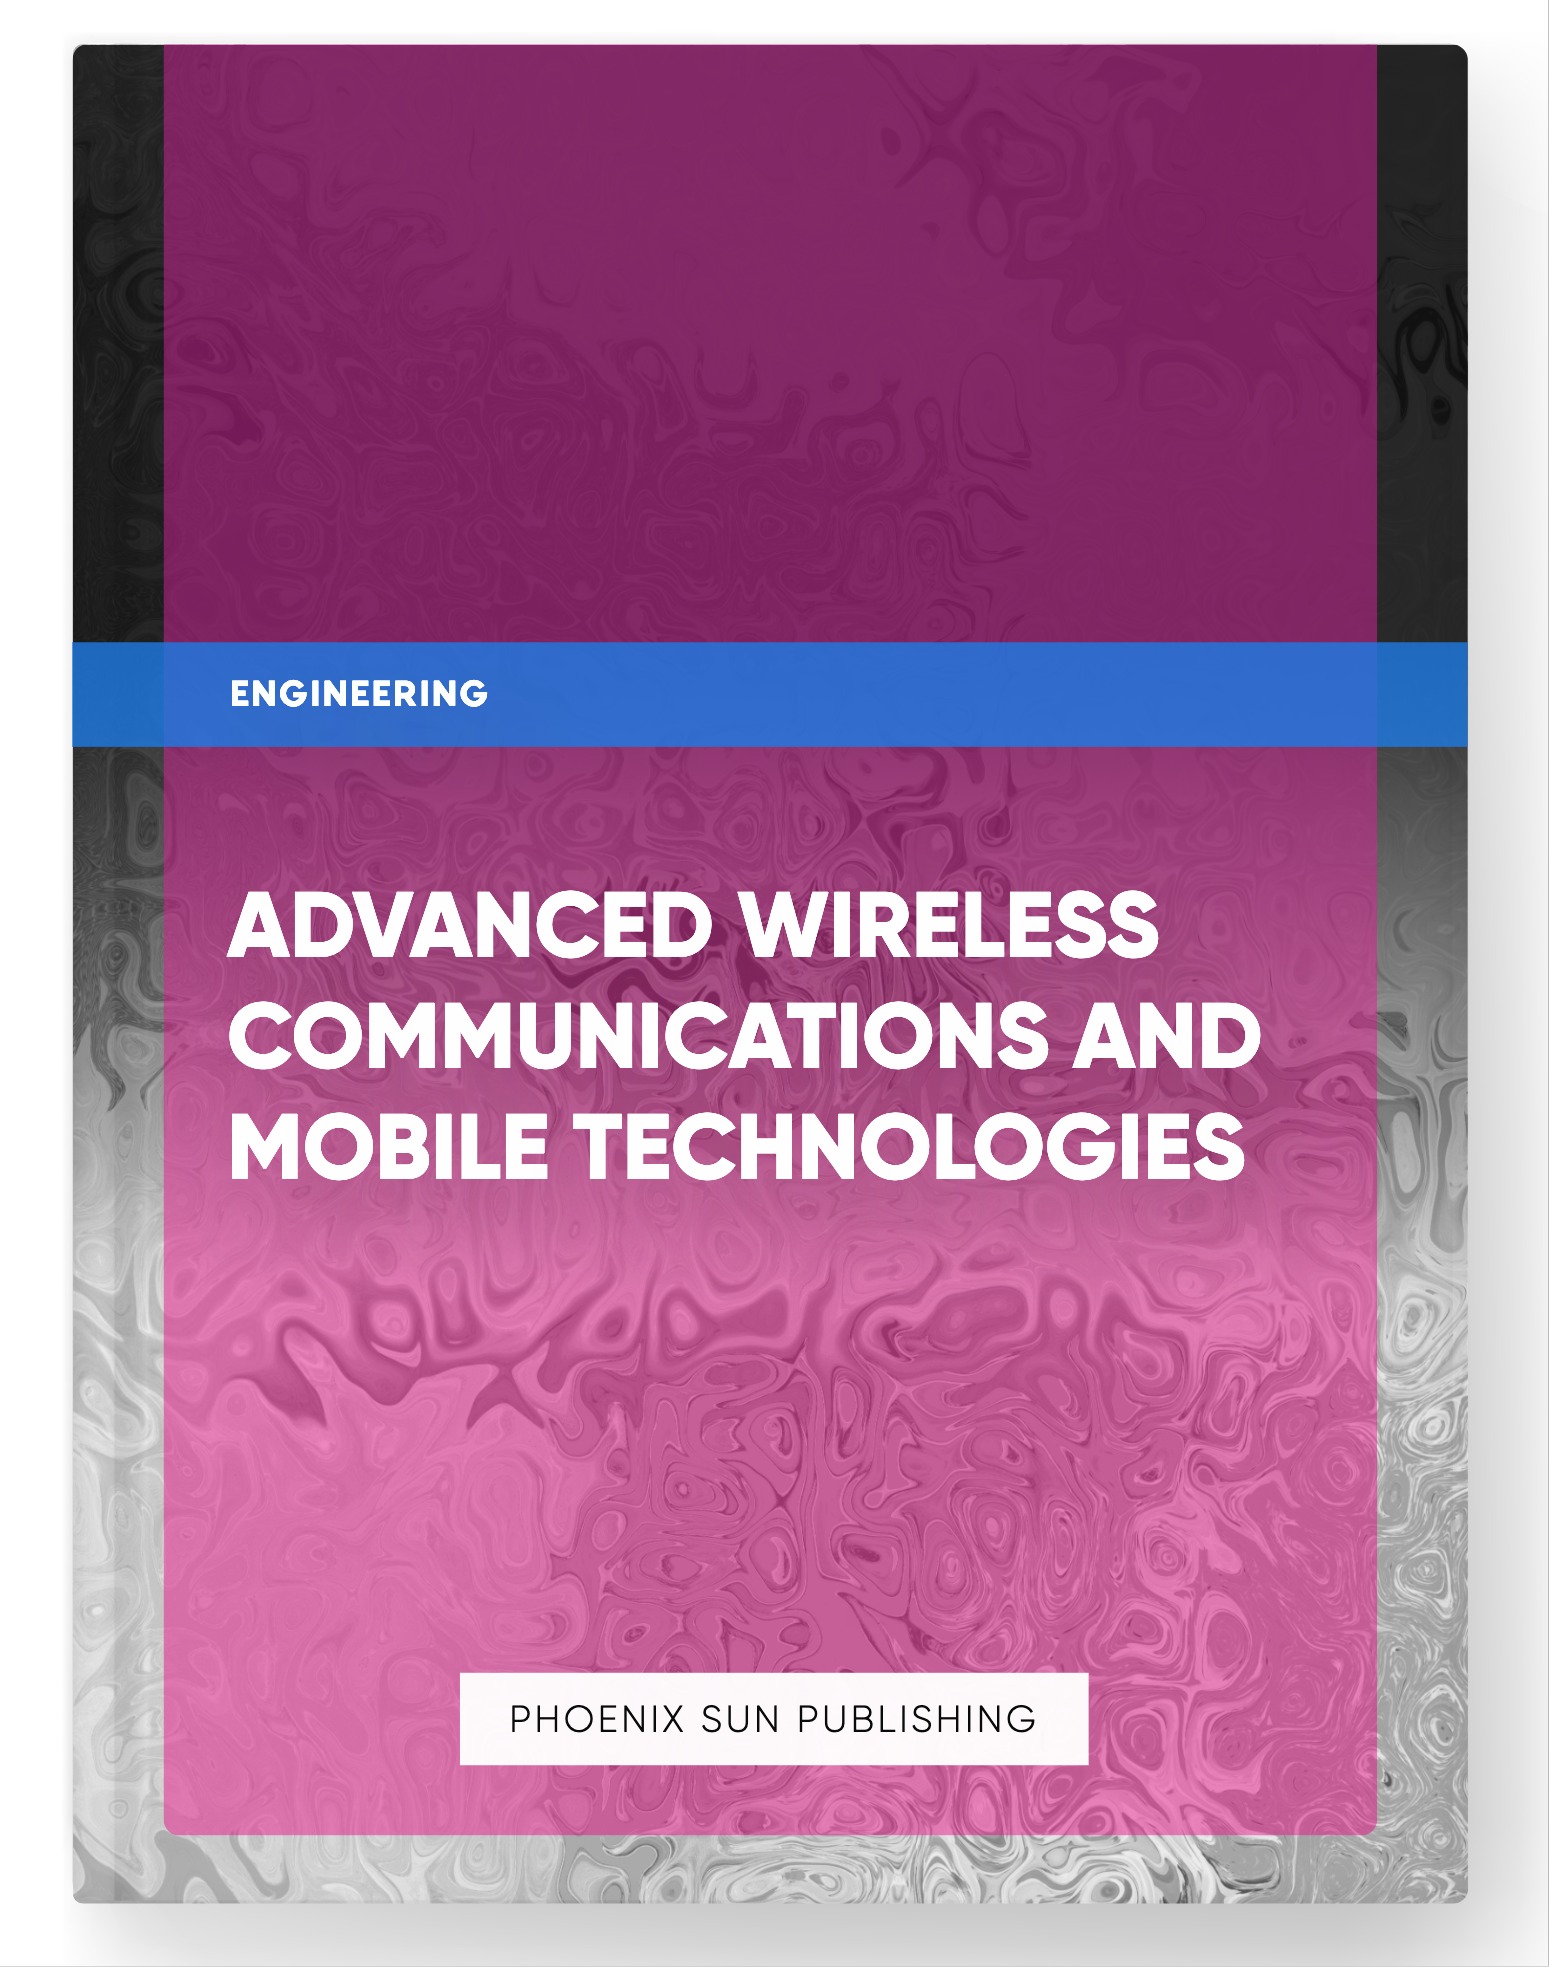 Advanced Wireless Communications and Mobile Technologies